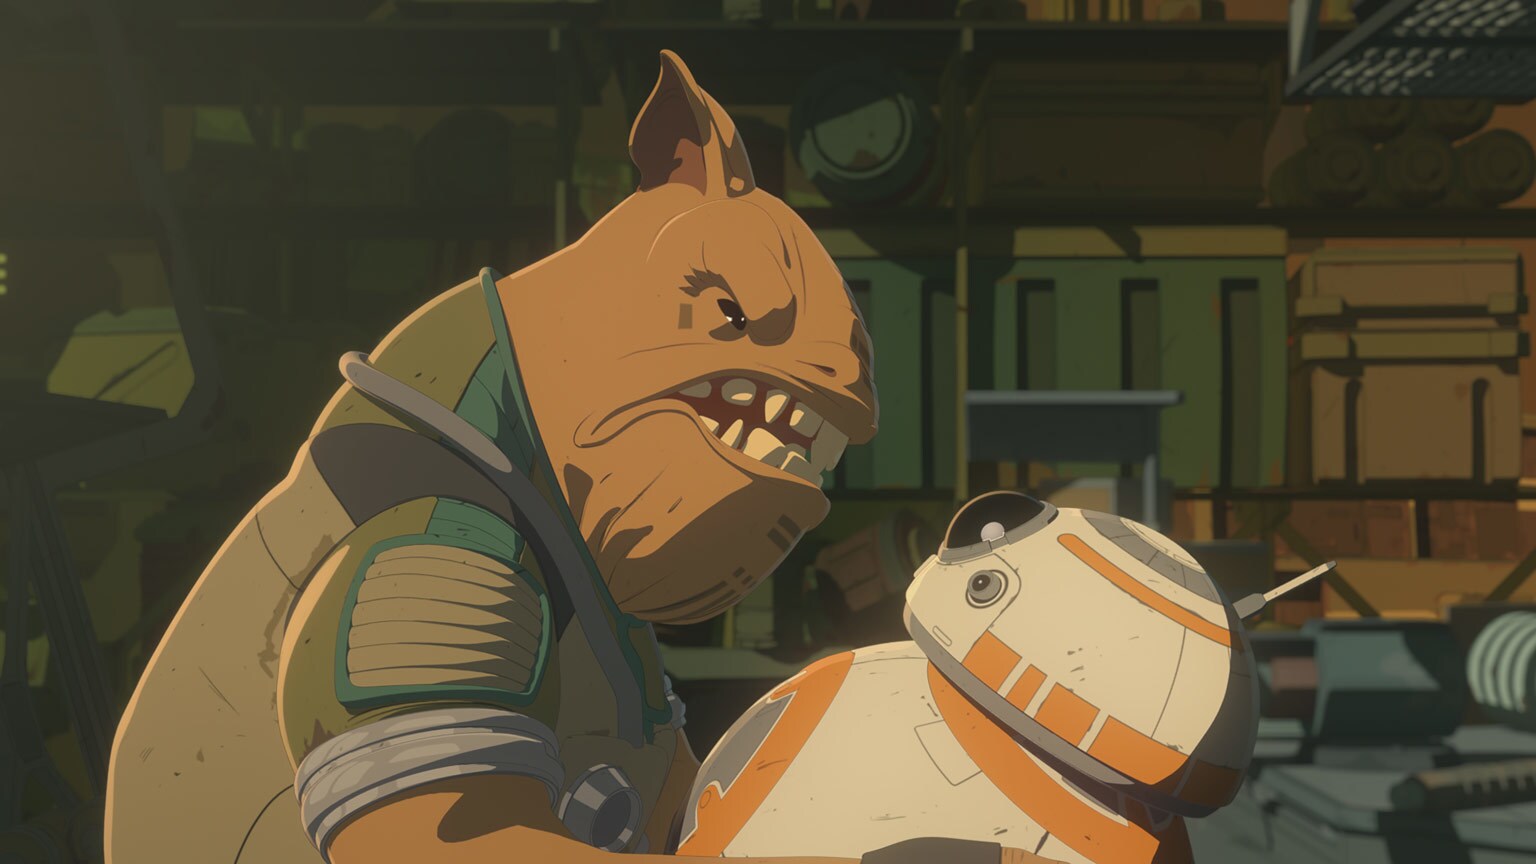 Bucket's List Extra: 6 Fun Facts from "Dangerous Business" - Star Wars Resistance